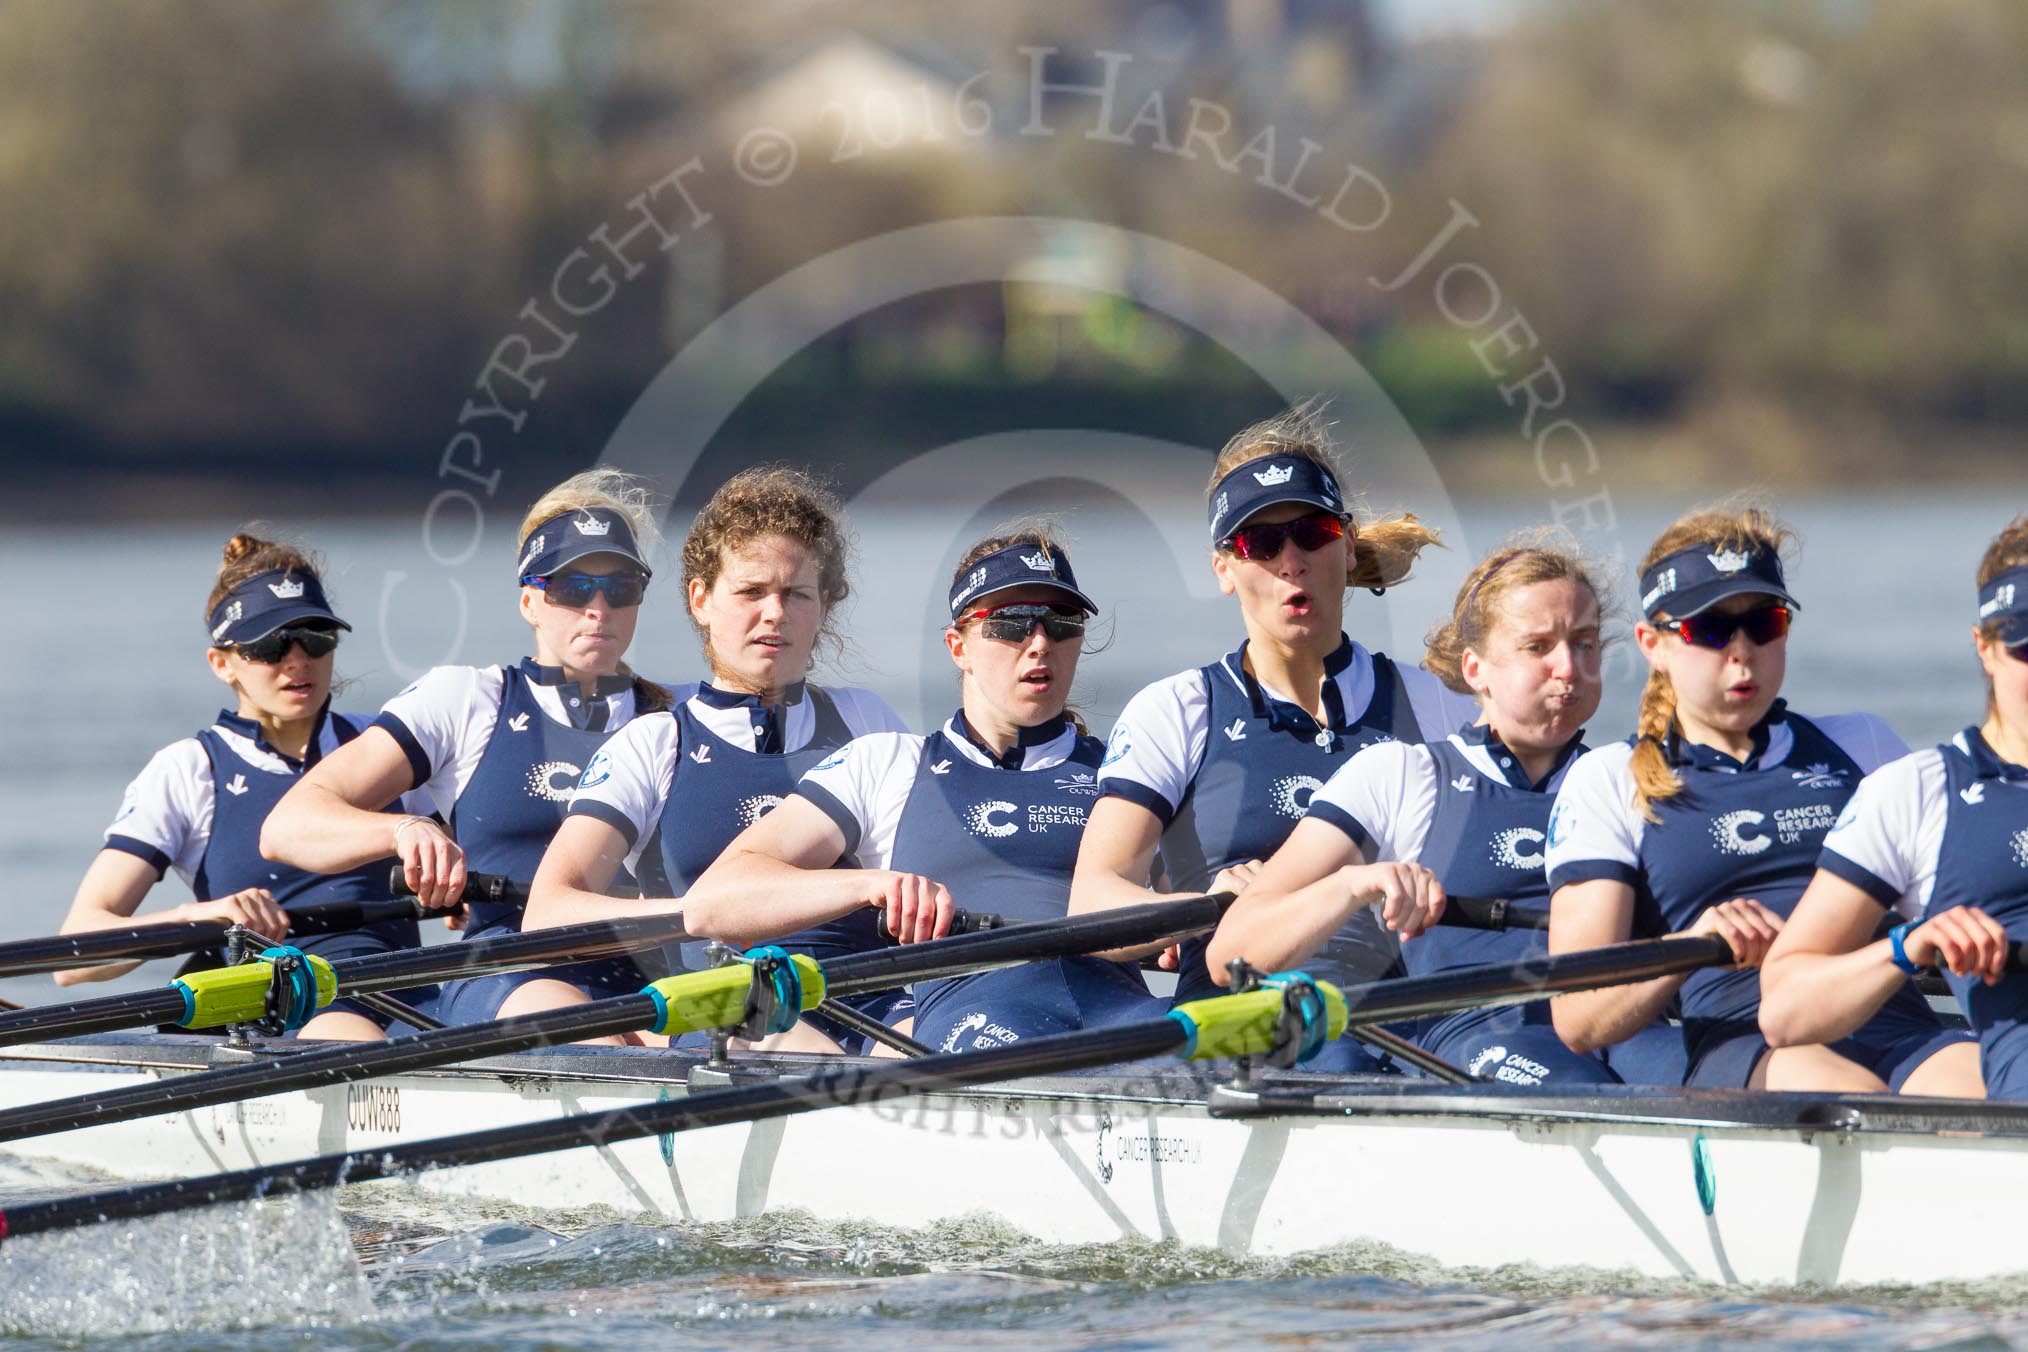 The Boat Race season 2016 -  The Cancer Research Women's Boat Race.
River Thames between Putney Bridge and Mortlake,
London SW15,

United Kingdom,
on 27 March 2016 at 14:11, image #187